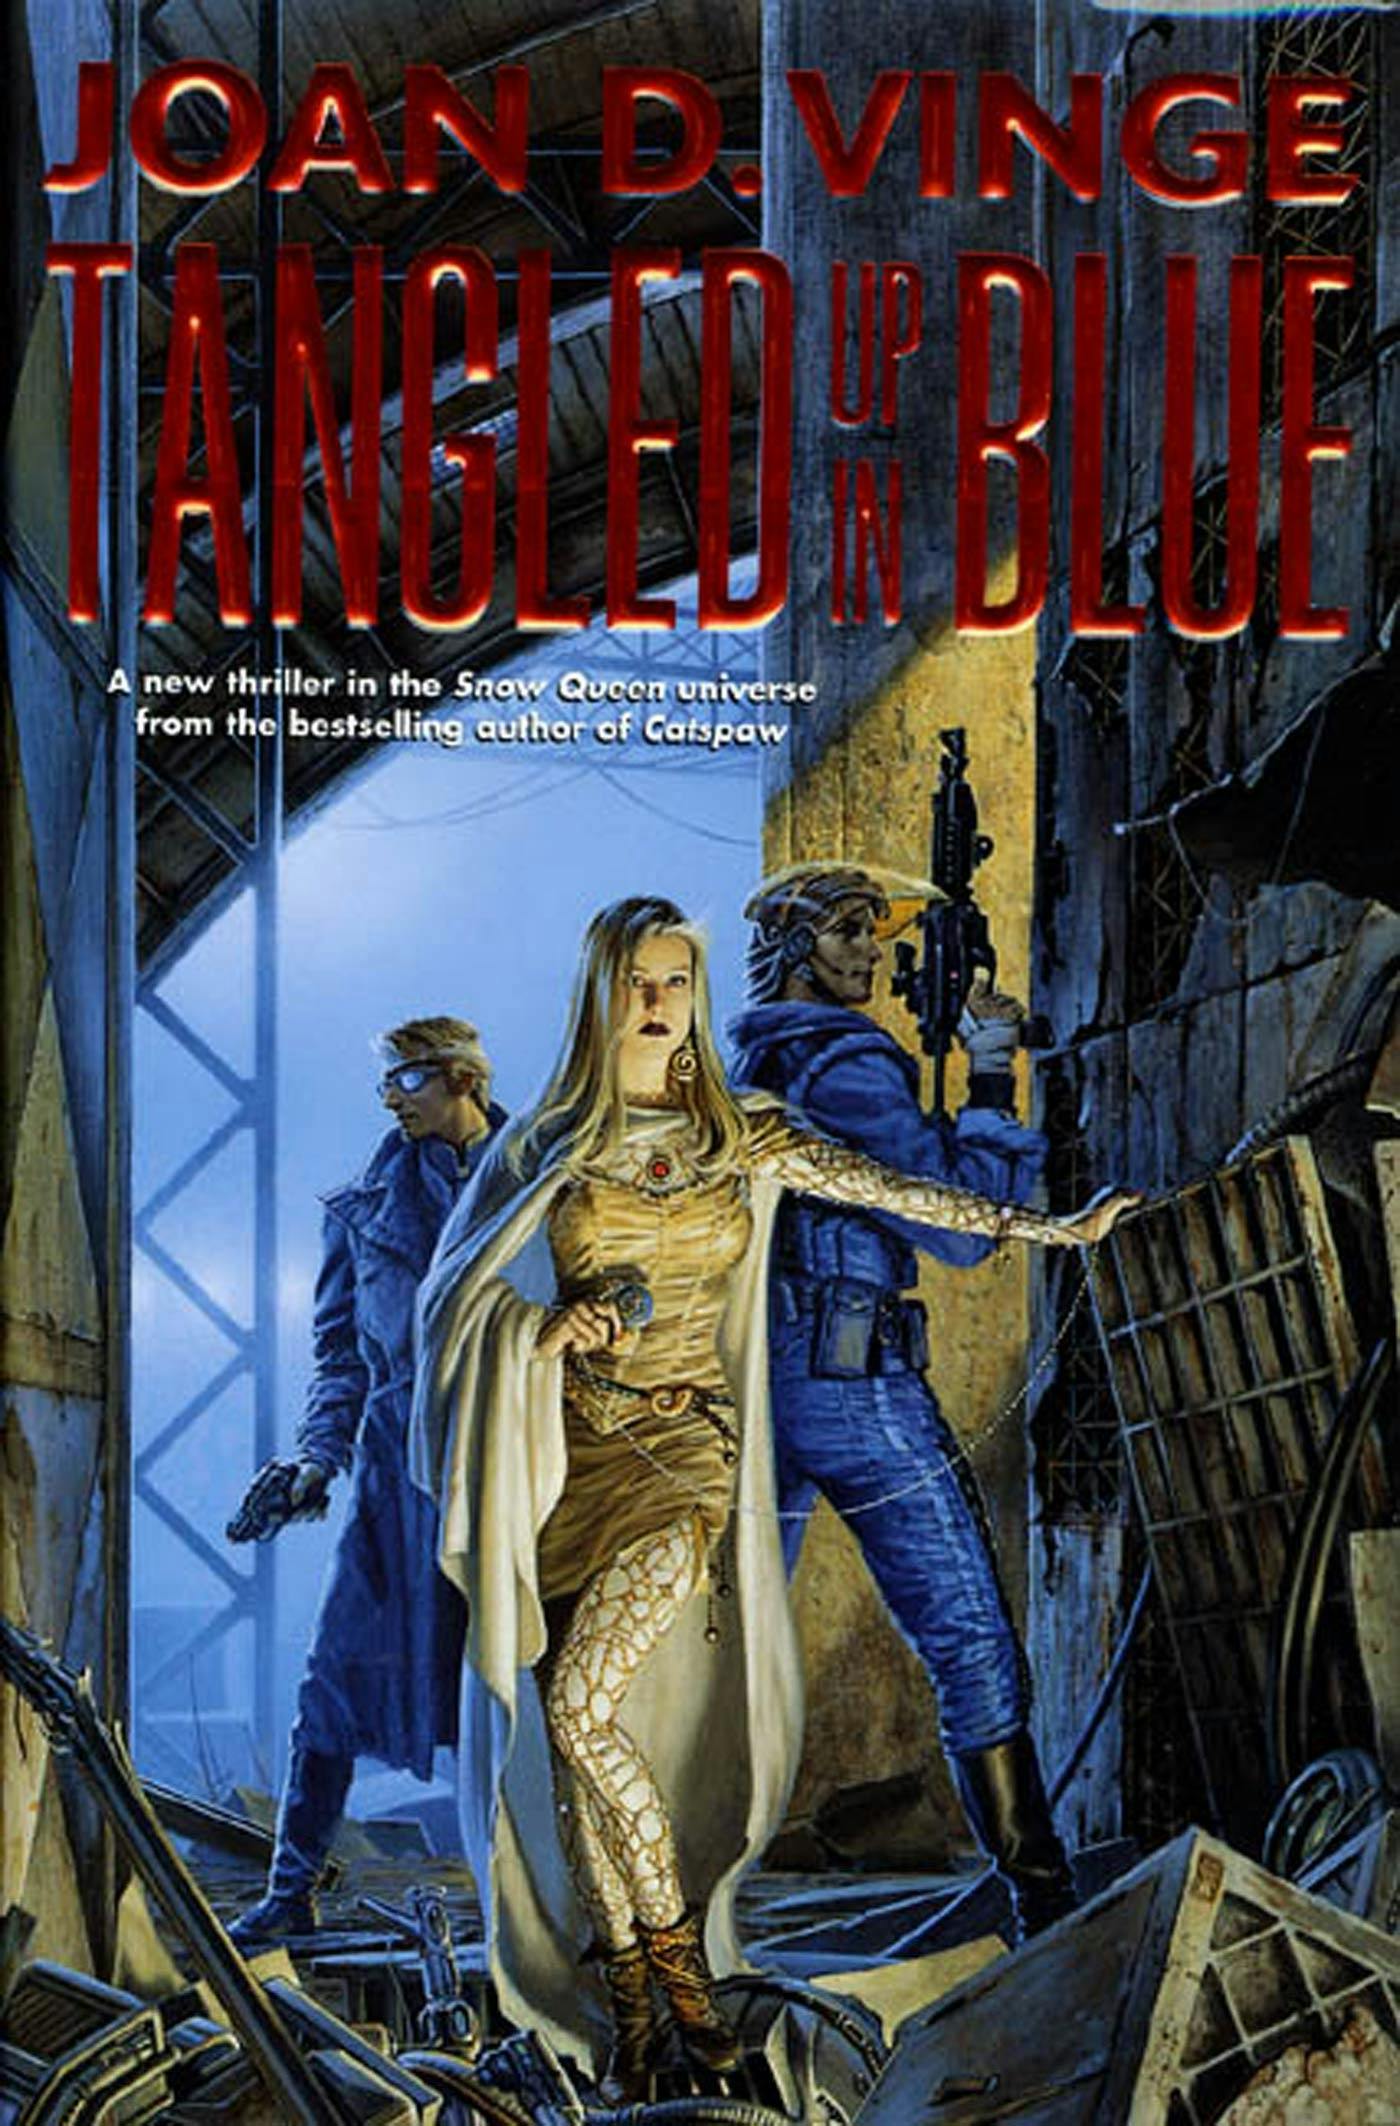 Image of Tangled Up In Blue